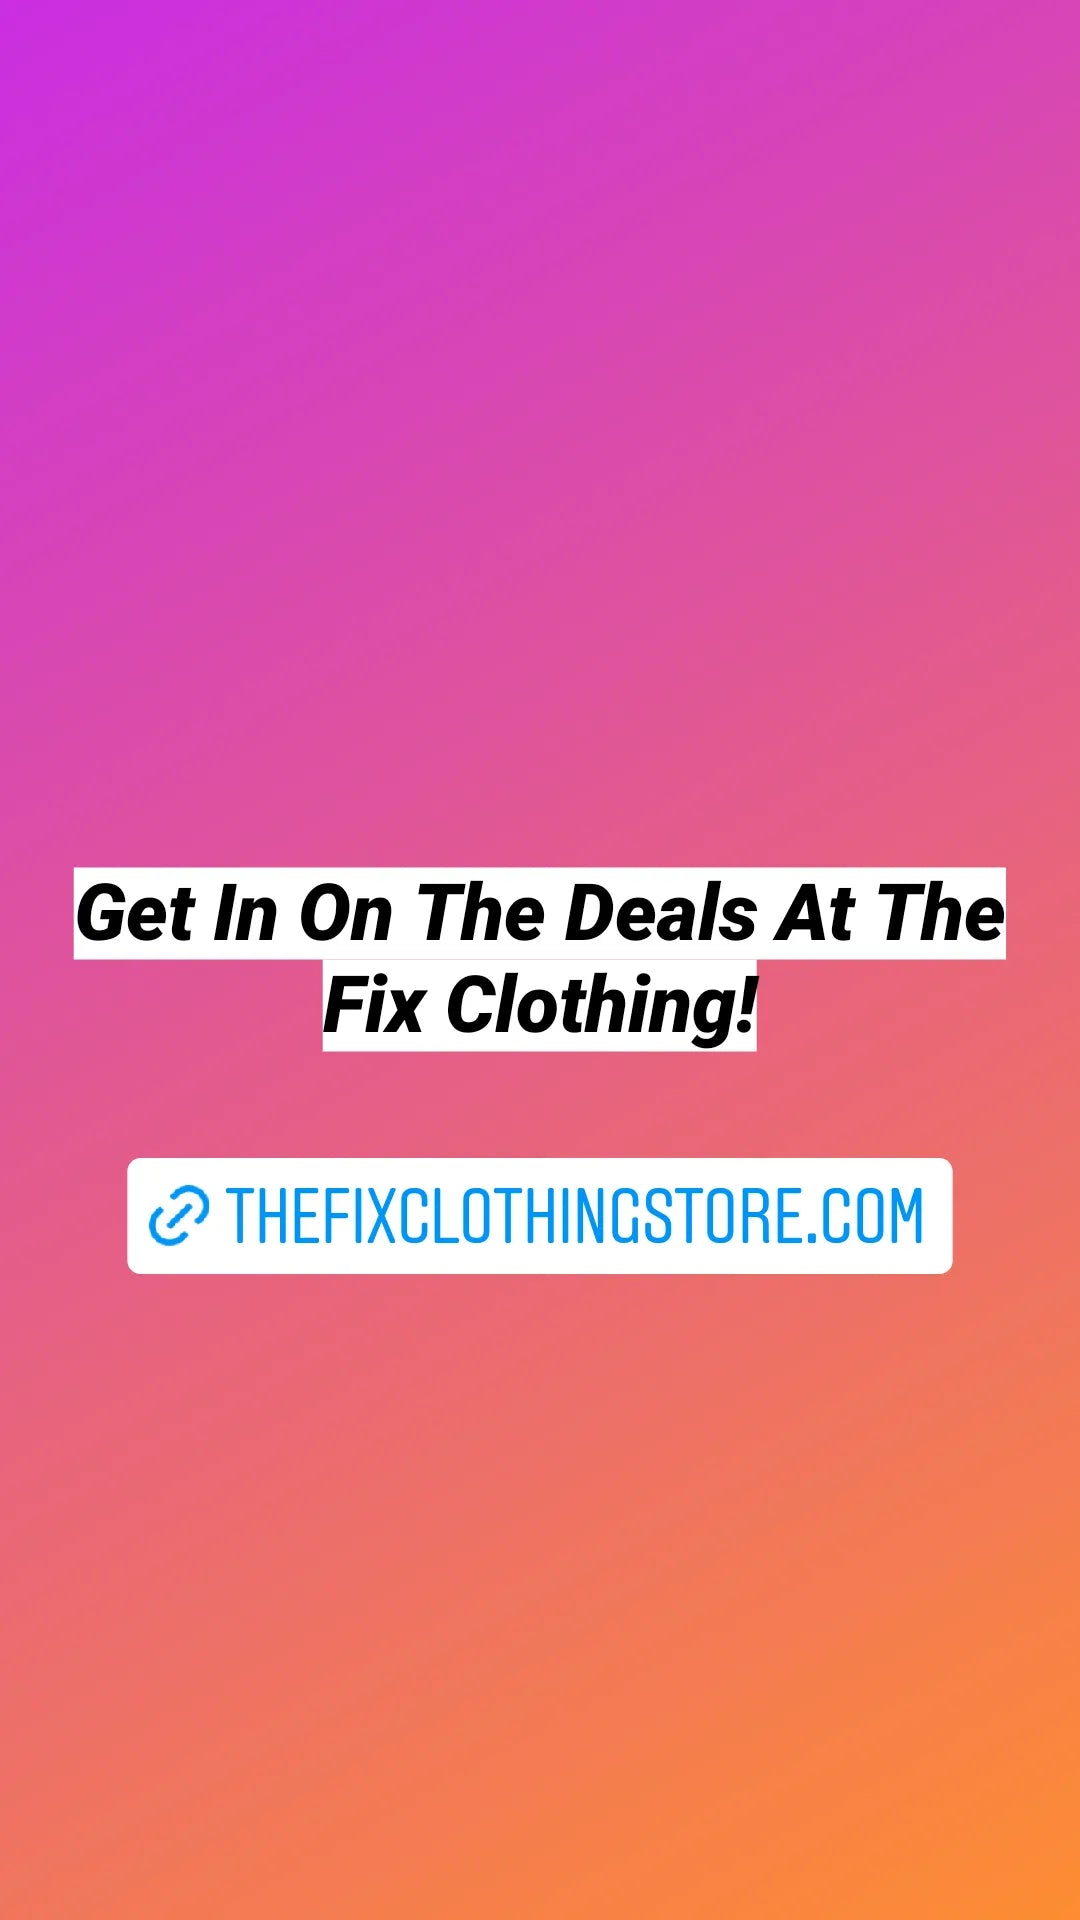 Look out free shipping - The Fix Clothing